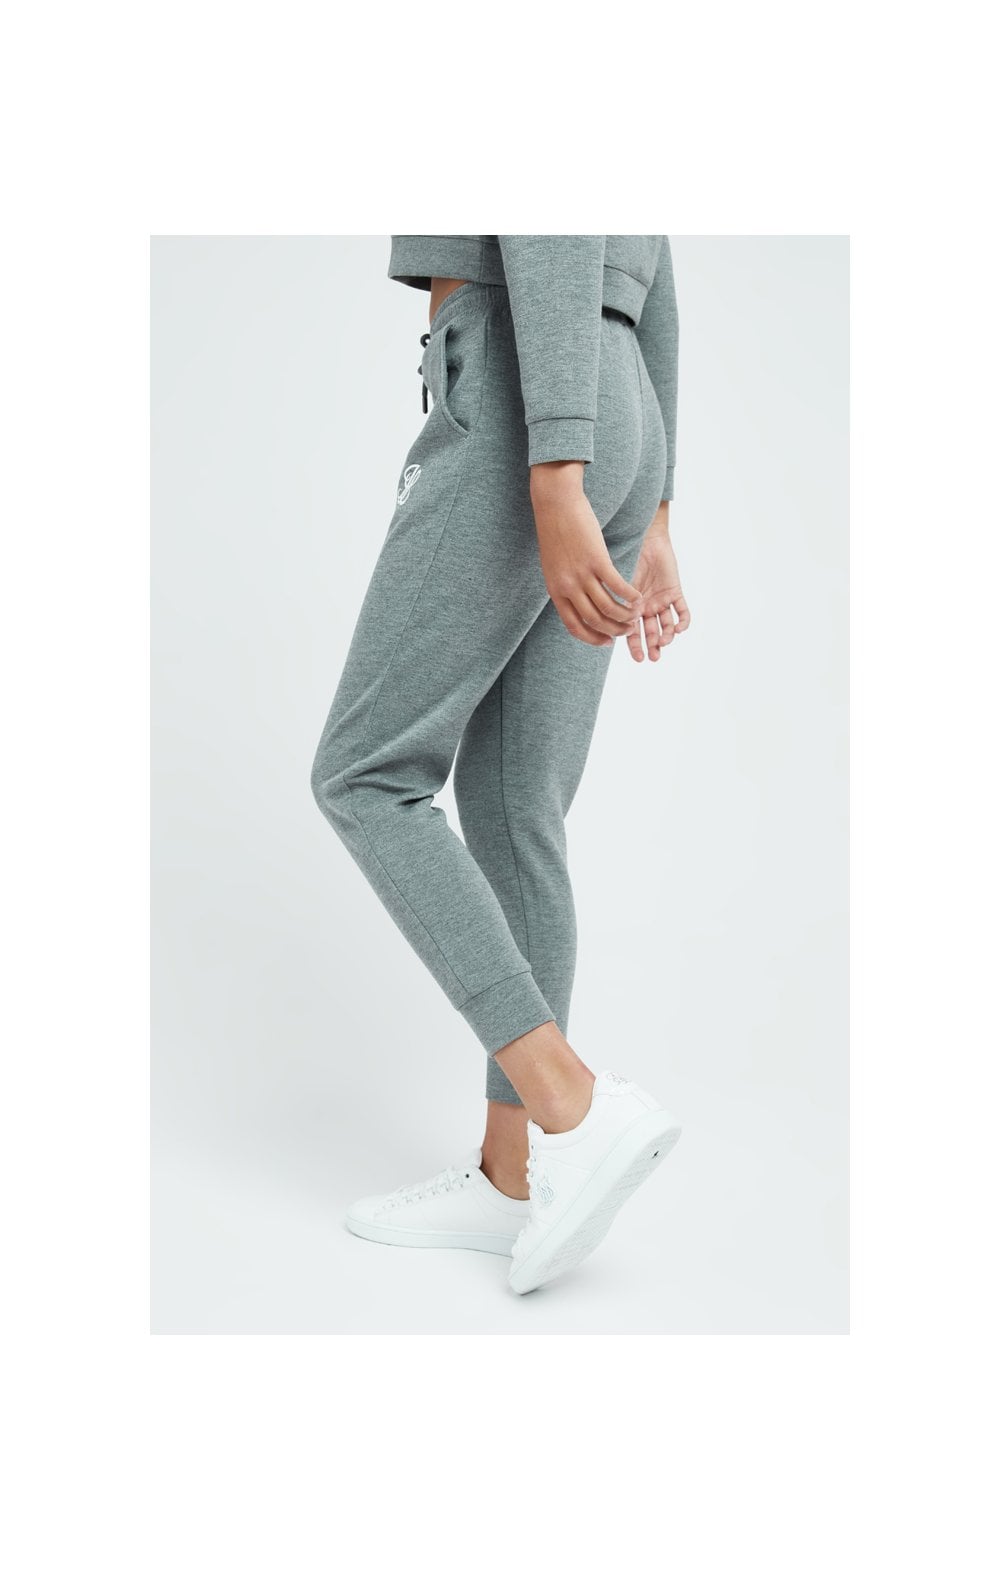 Load image into Gallery viewer, Illusive London Dual Track Pant - Grey Marl (2)